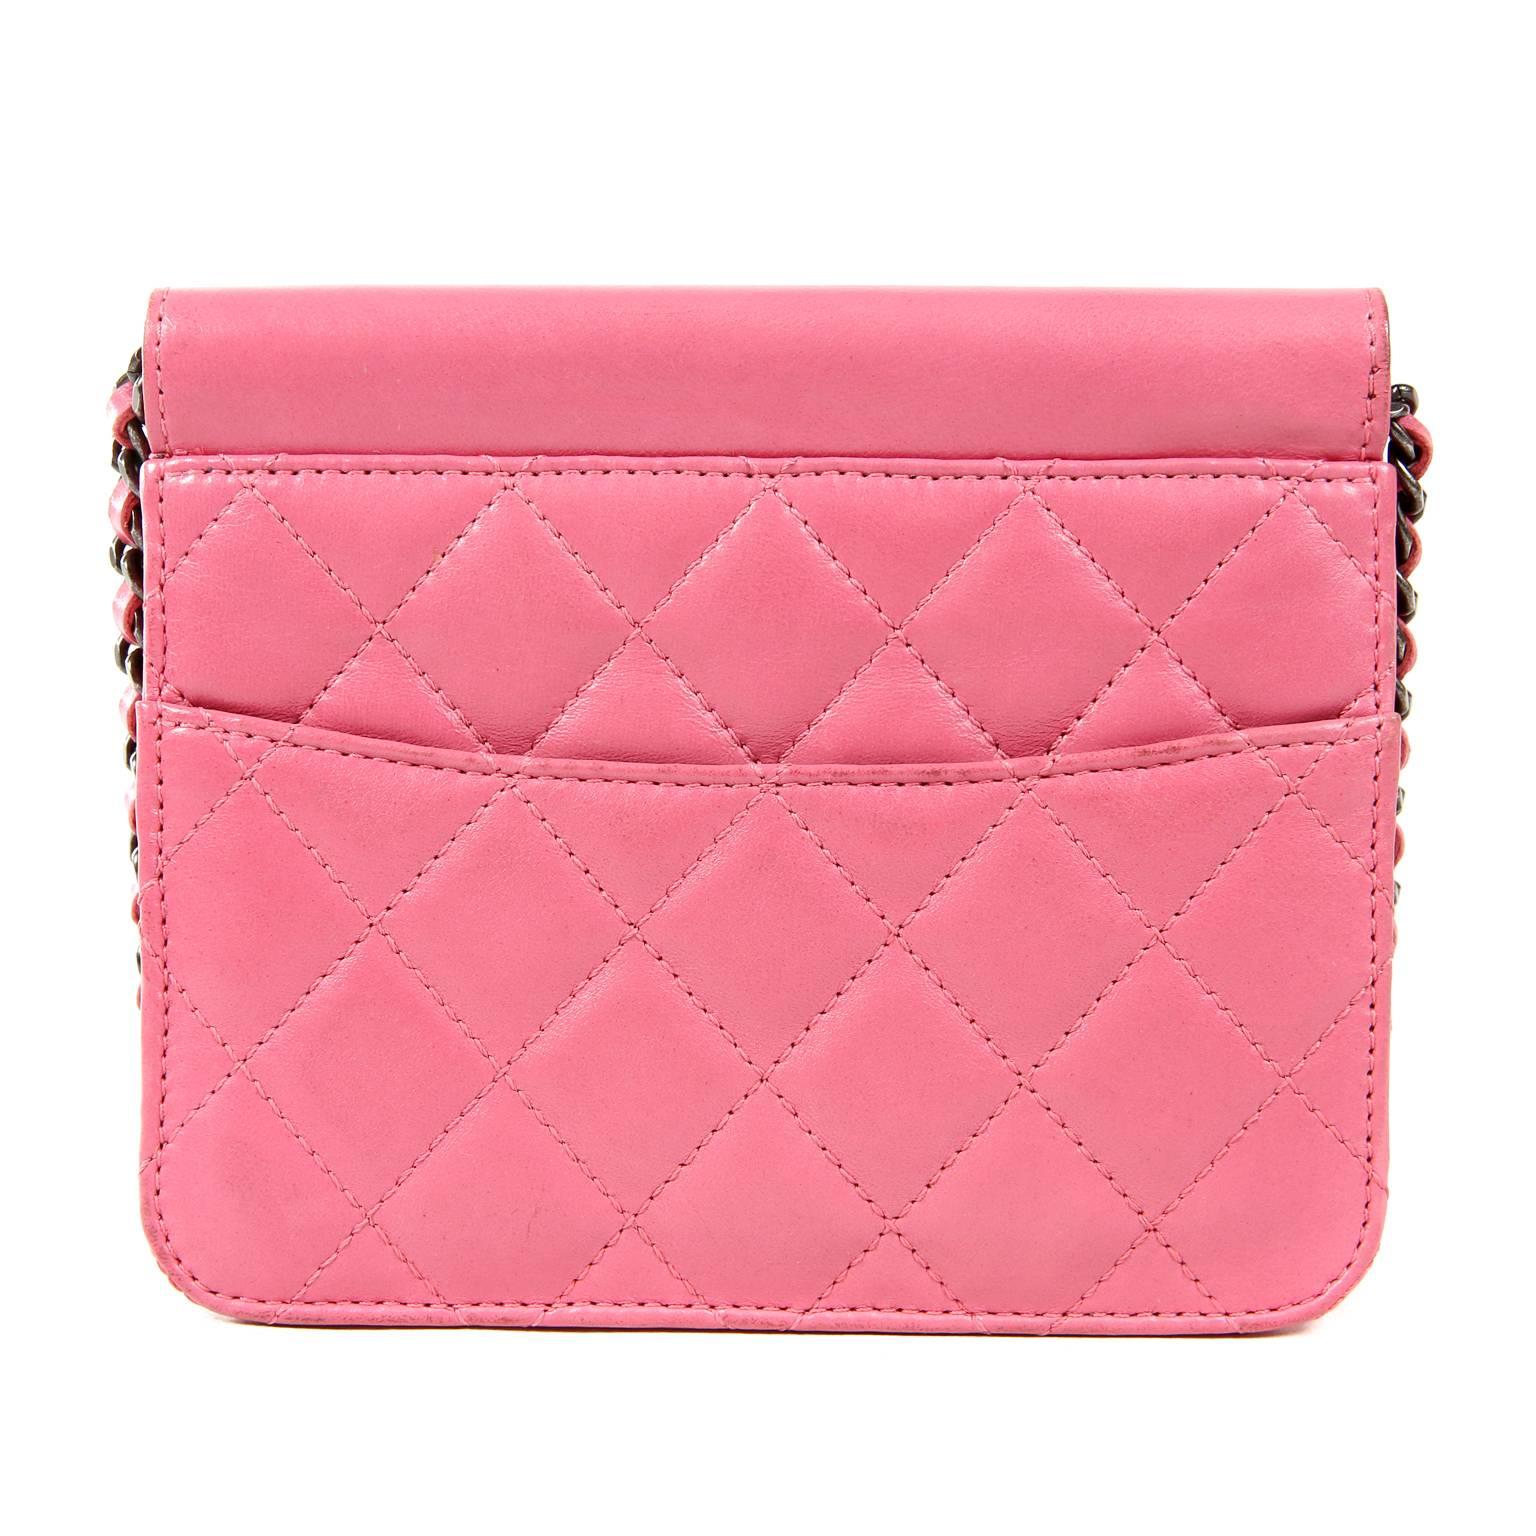 Chanel Pink Leather Mini Flap Bag- PRISTINE unworn condition
The crossbody style holds just the essentials for day or evening yet elevates any ensemble effortlessly. 
Taffy pink leather is quilted in signature Chanel diamond pattern.  Large